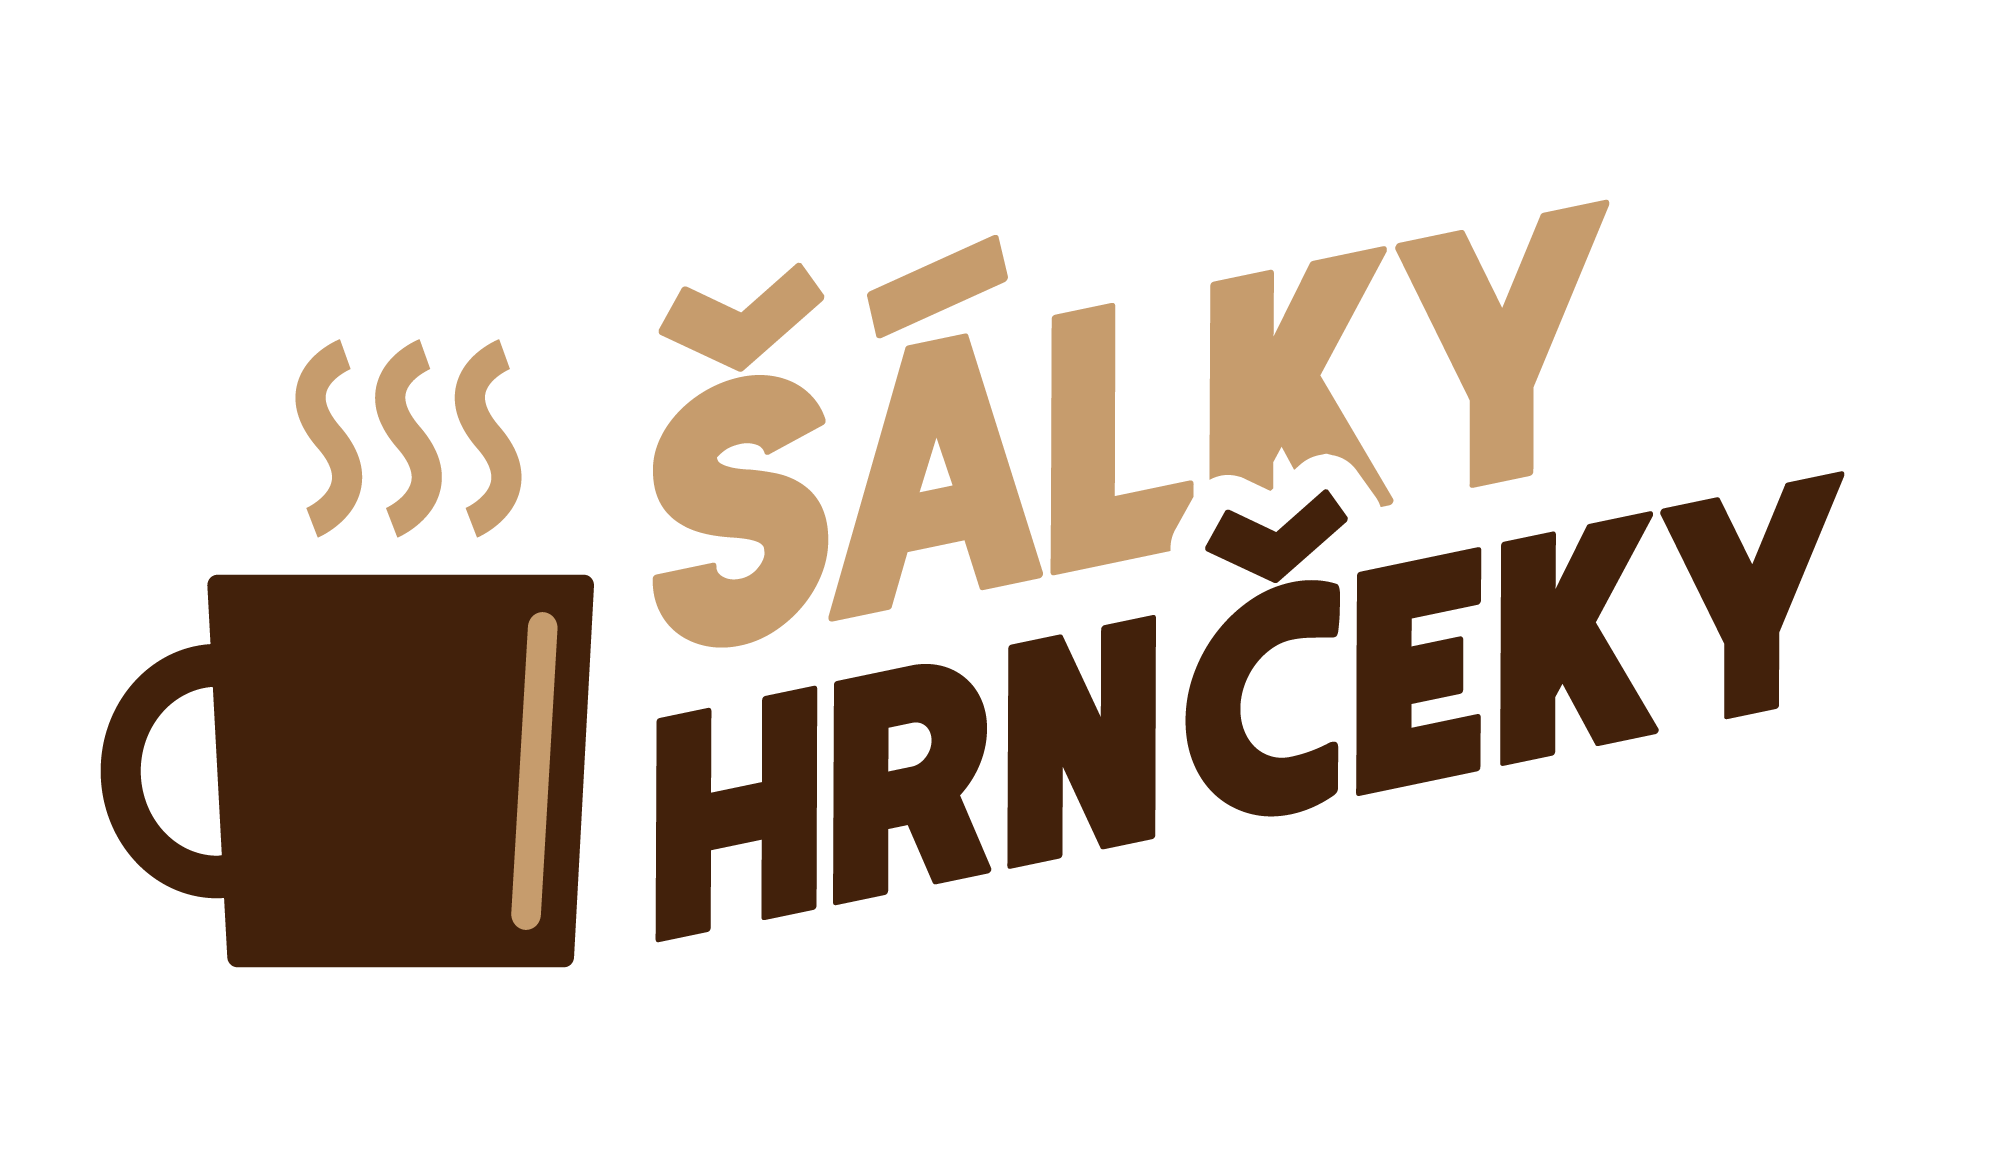 cropped salky hrnceky logo